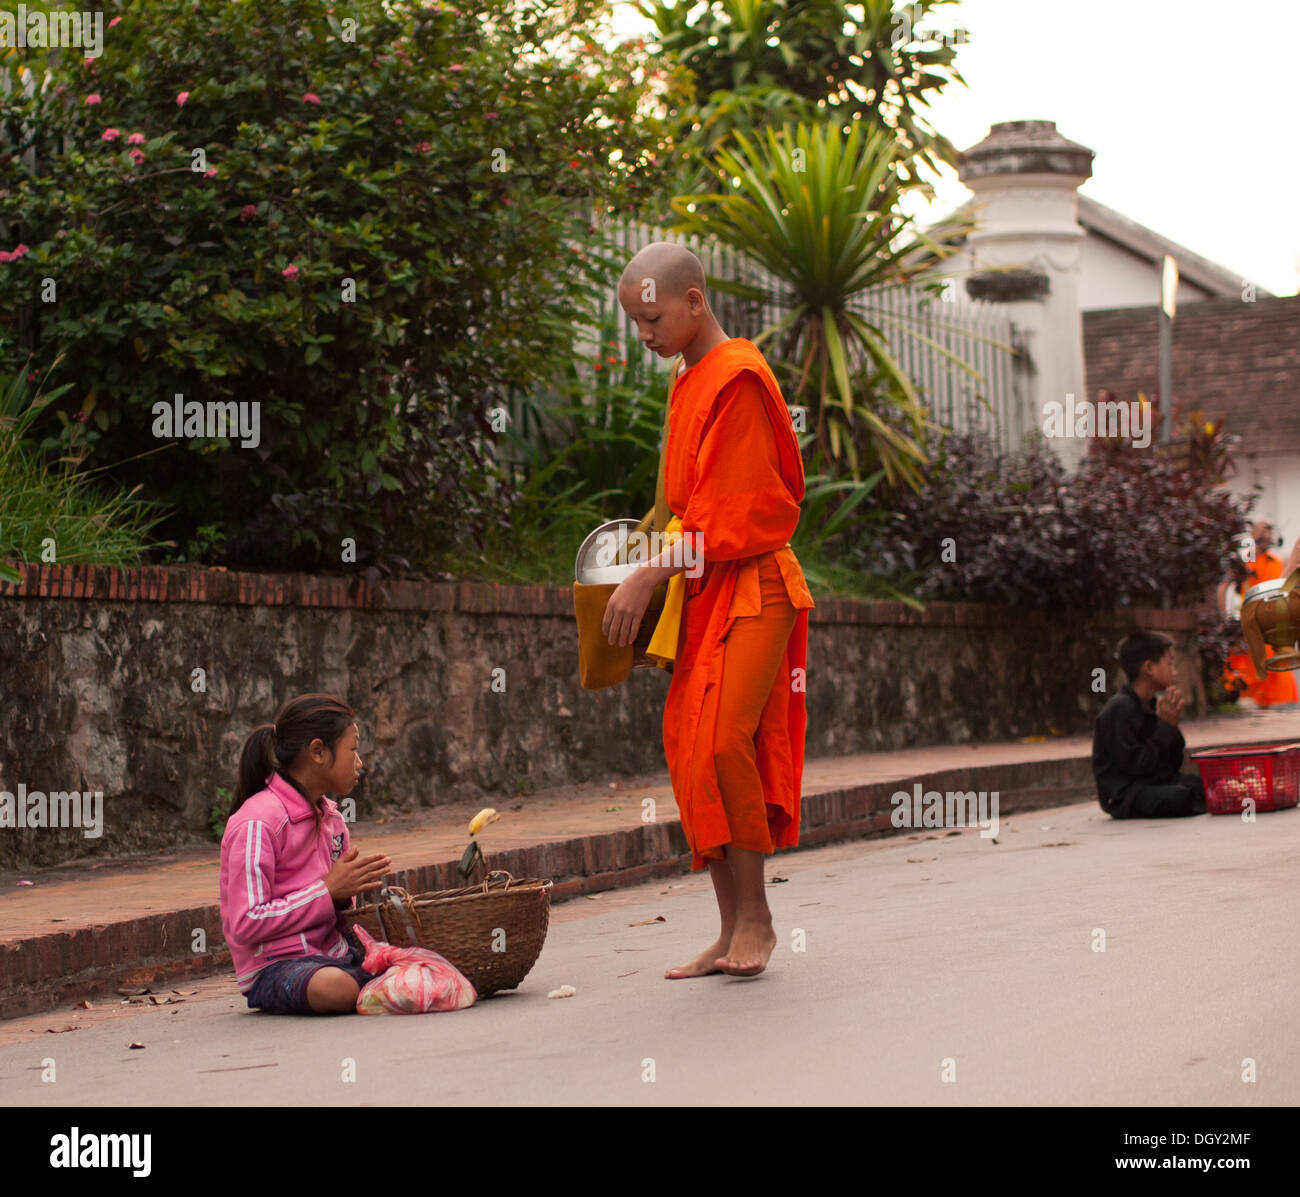 A Buddhist monk gives a poor girl food during the daily morning ceremony of giving alms to monks in Luang Prabang, Laos. Stock Photo